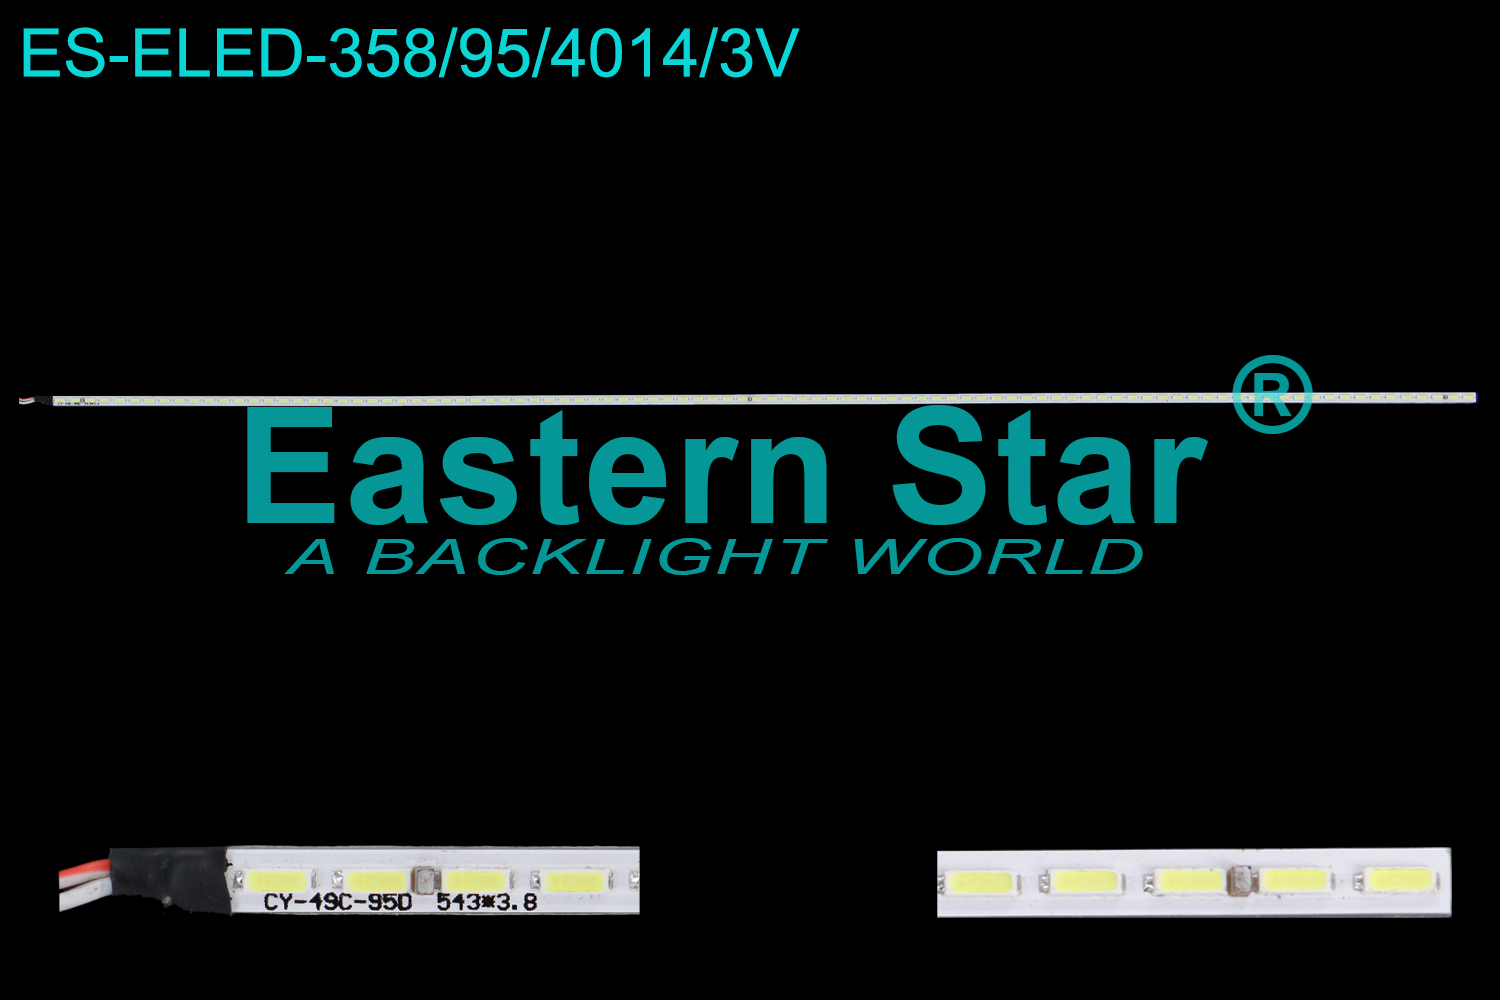 ES-ELED-358 ELED/EDGE TV backlight use for 49'' CY-49C-95D  543*3.8  LED STRIPS(1)